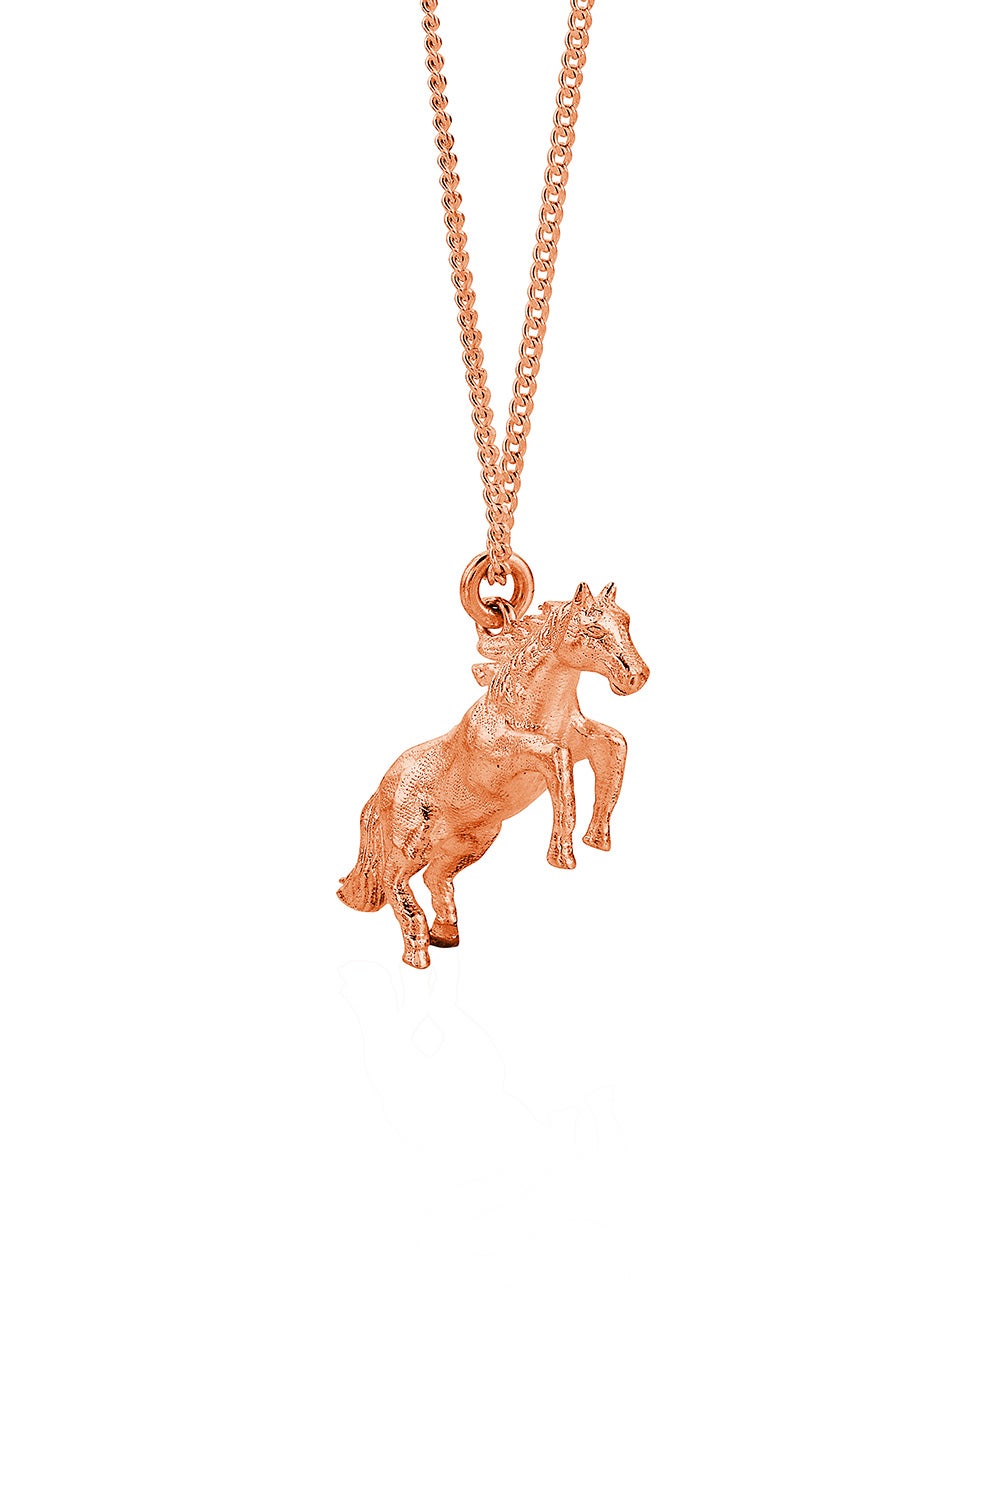 14K GOLD PLATED HORSE PENDANT 24